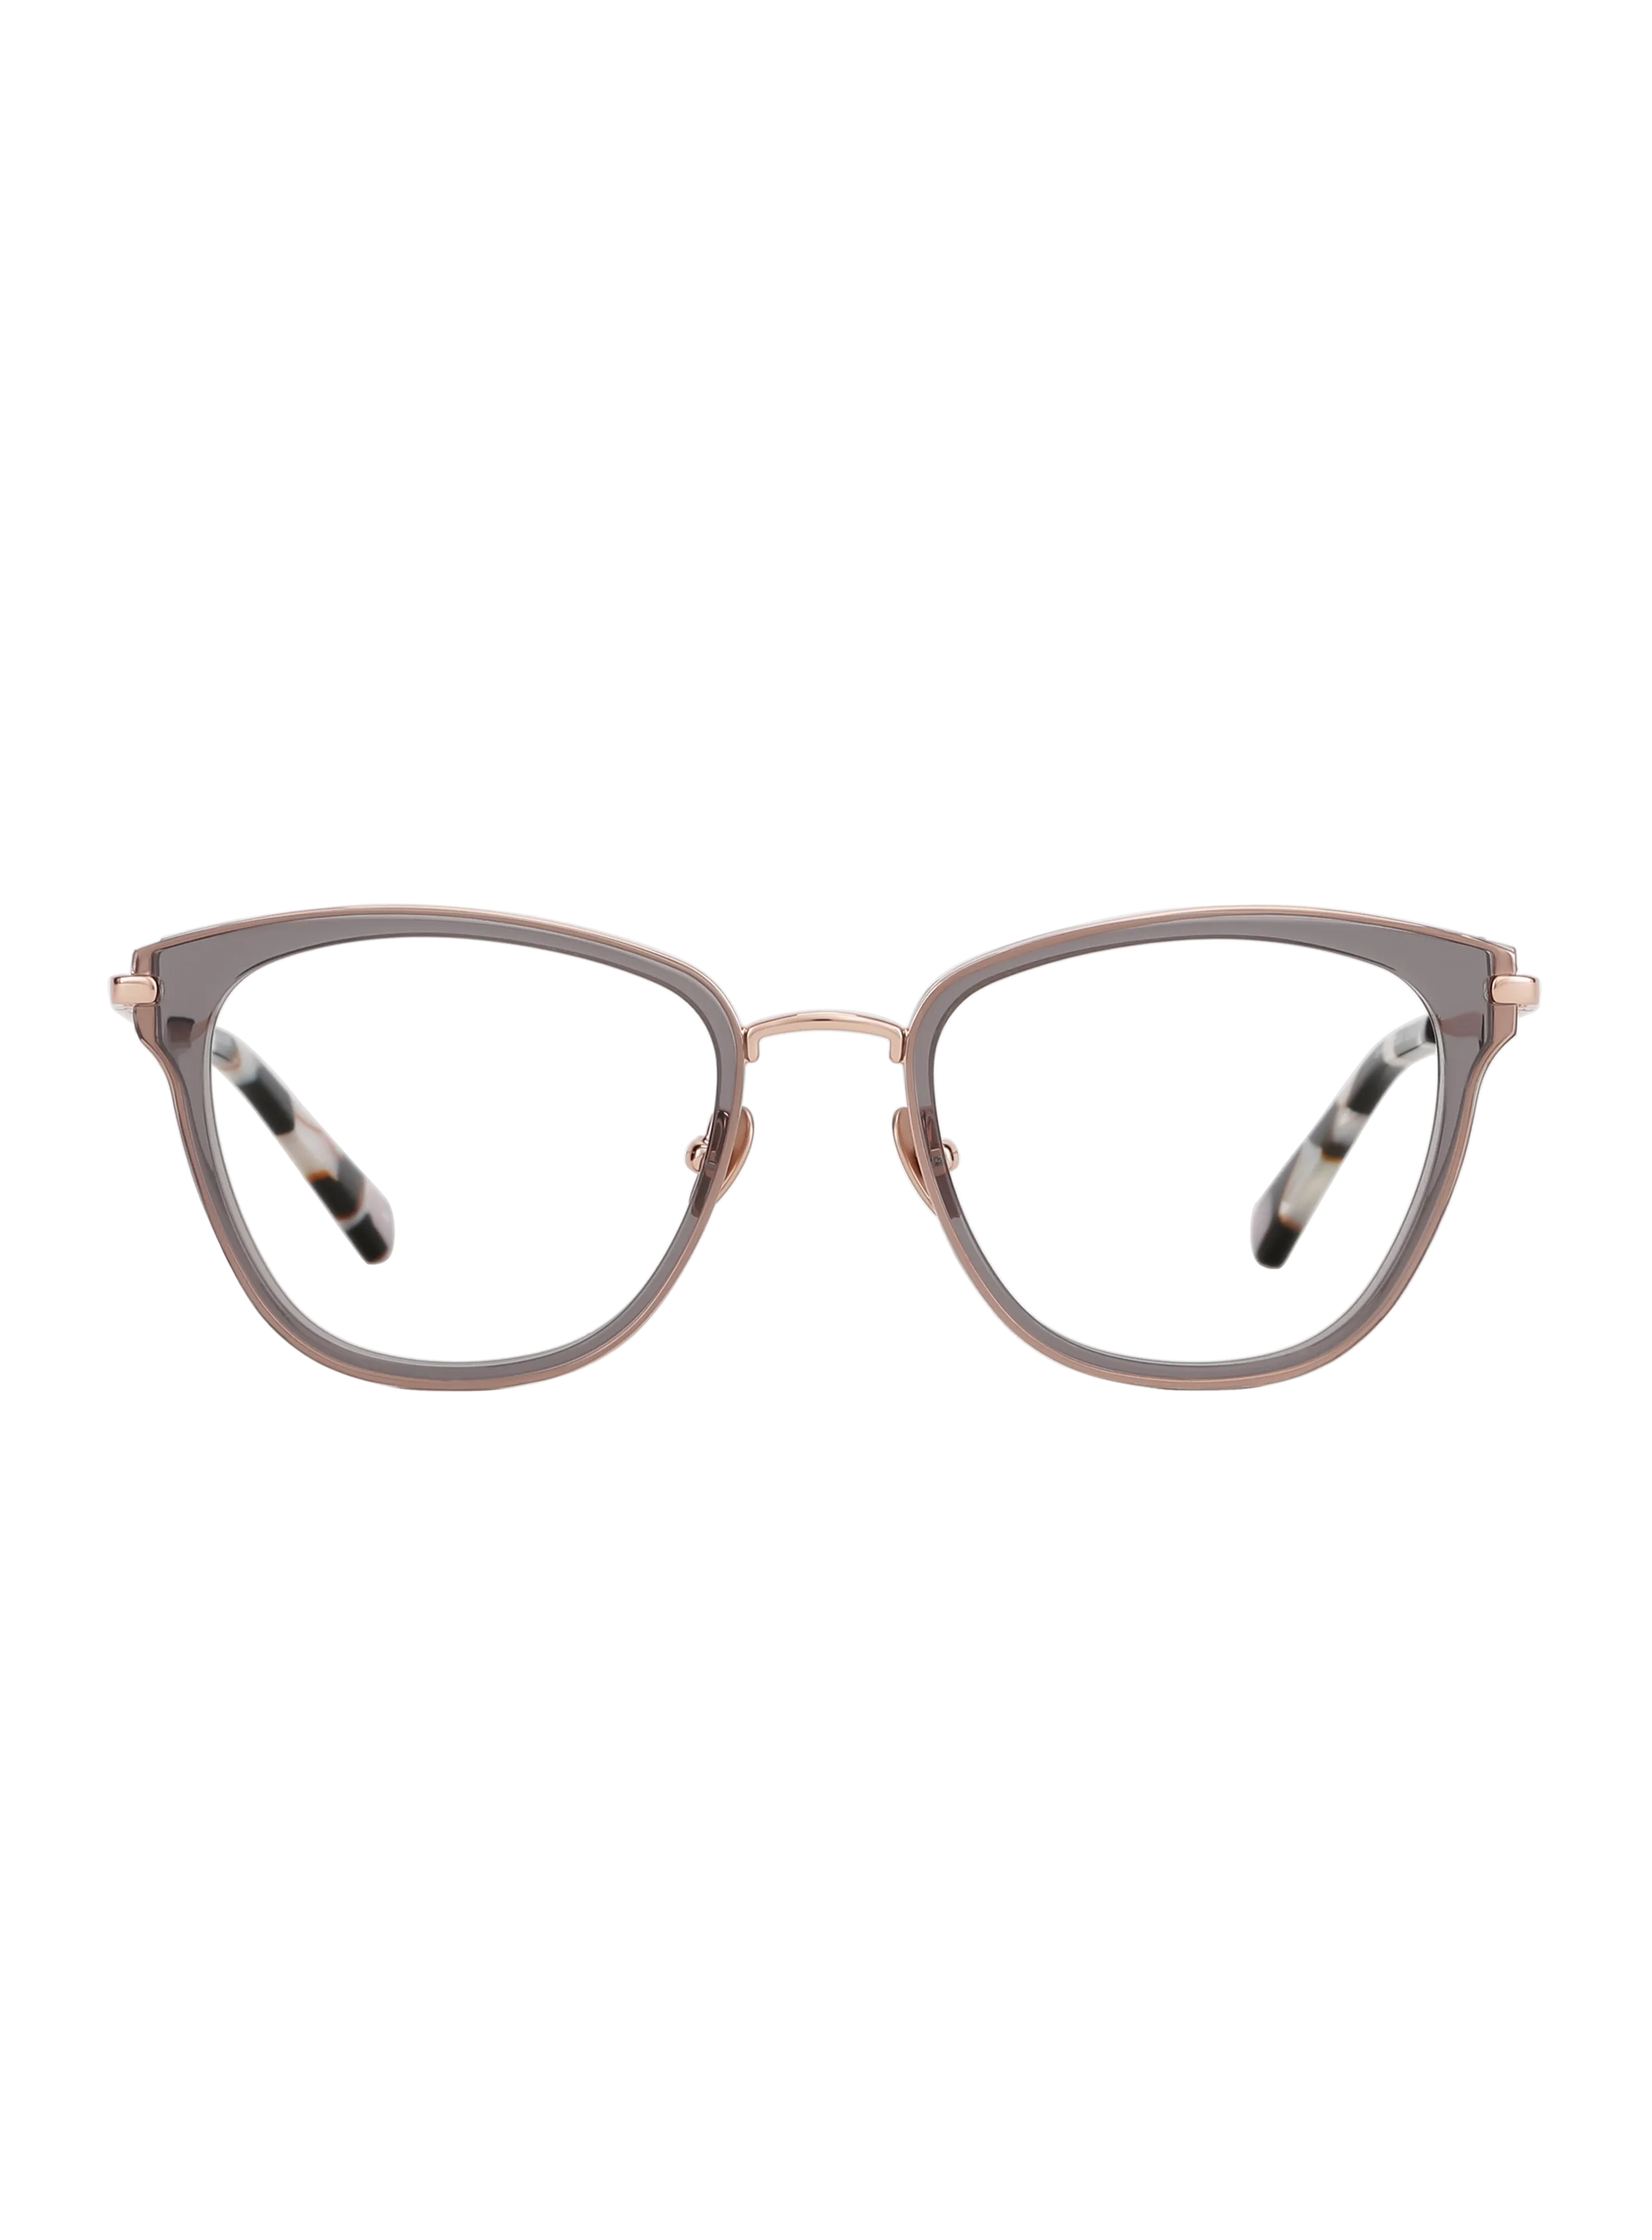 Farbe_clear blue rosegold 005